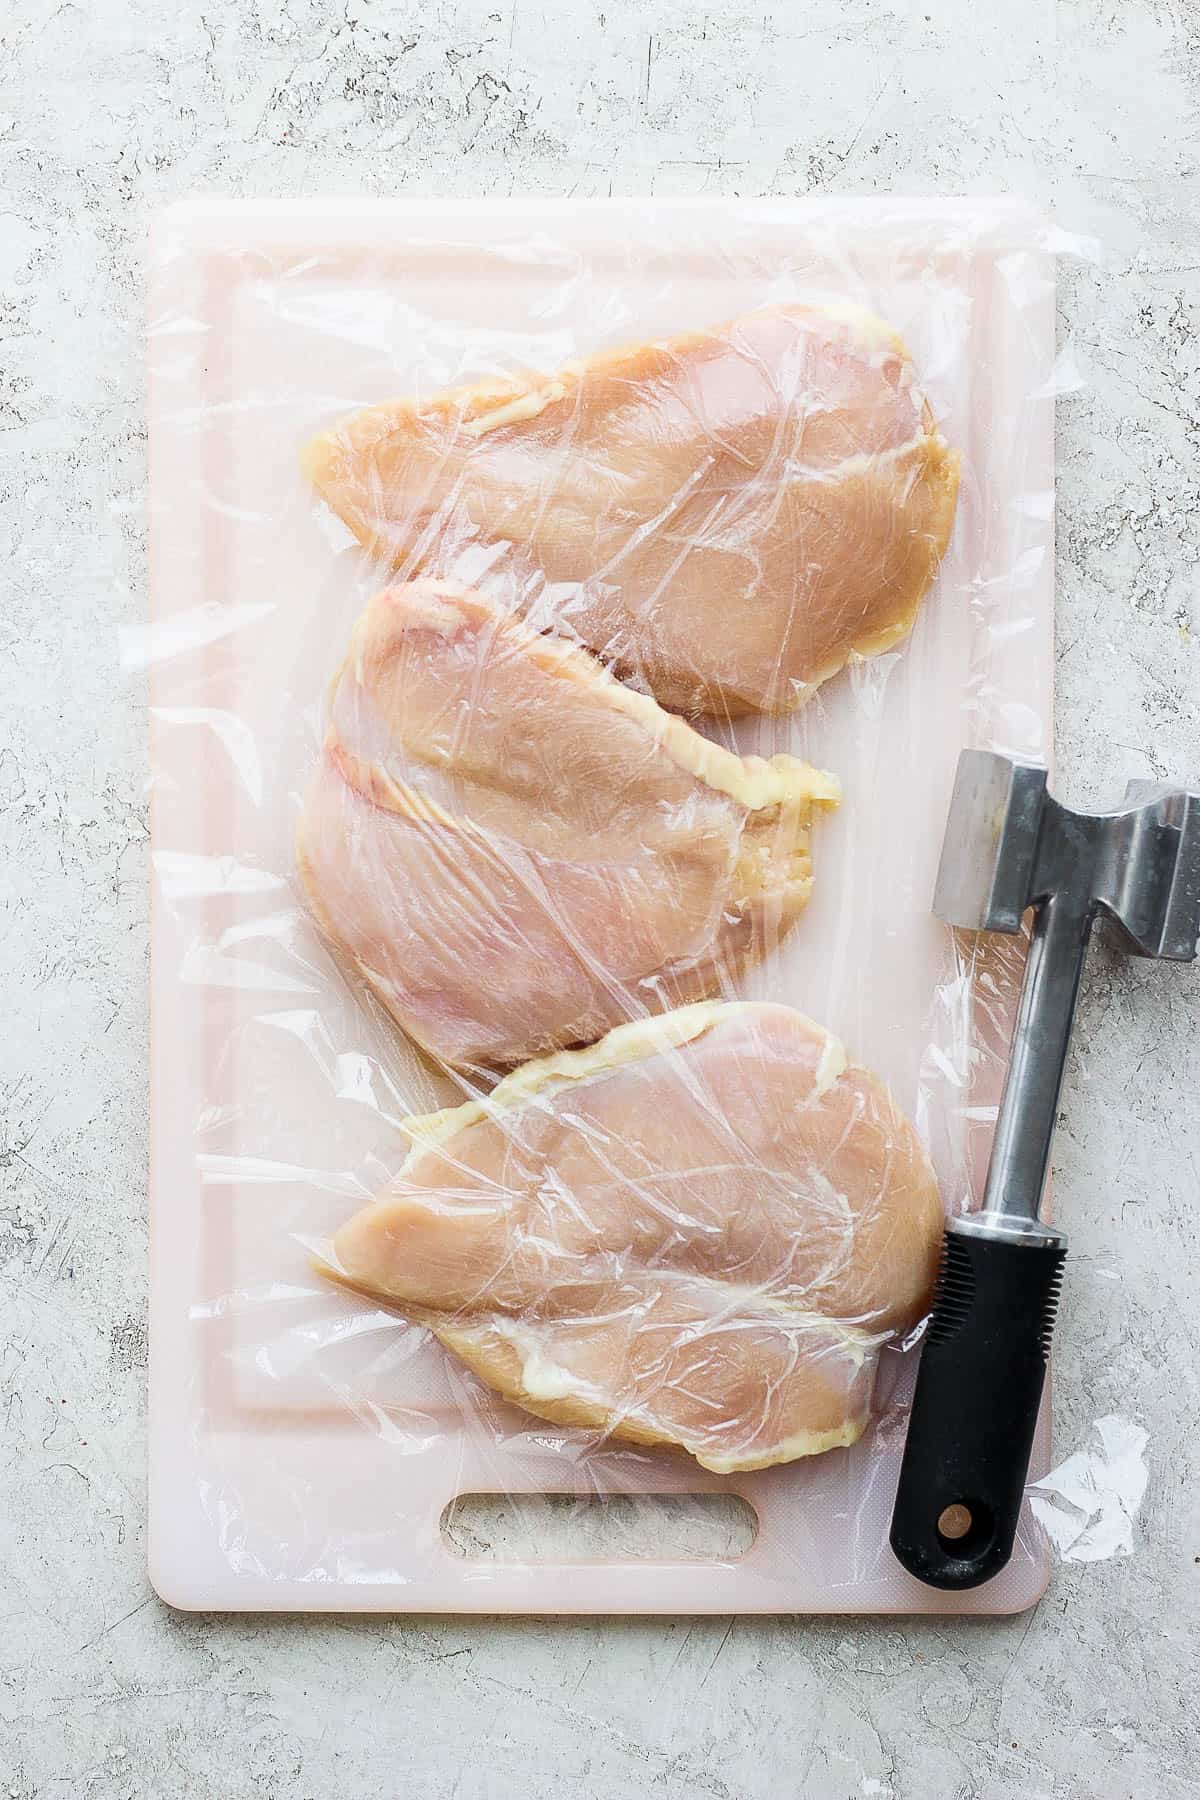 Raw chicken breasts on a cutting board with plastic wrap over them and a meat tenderizer.